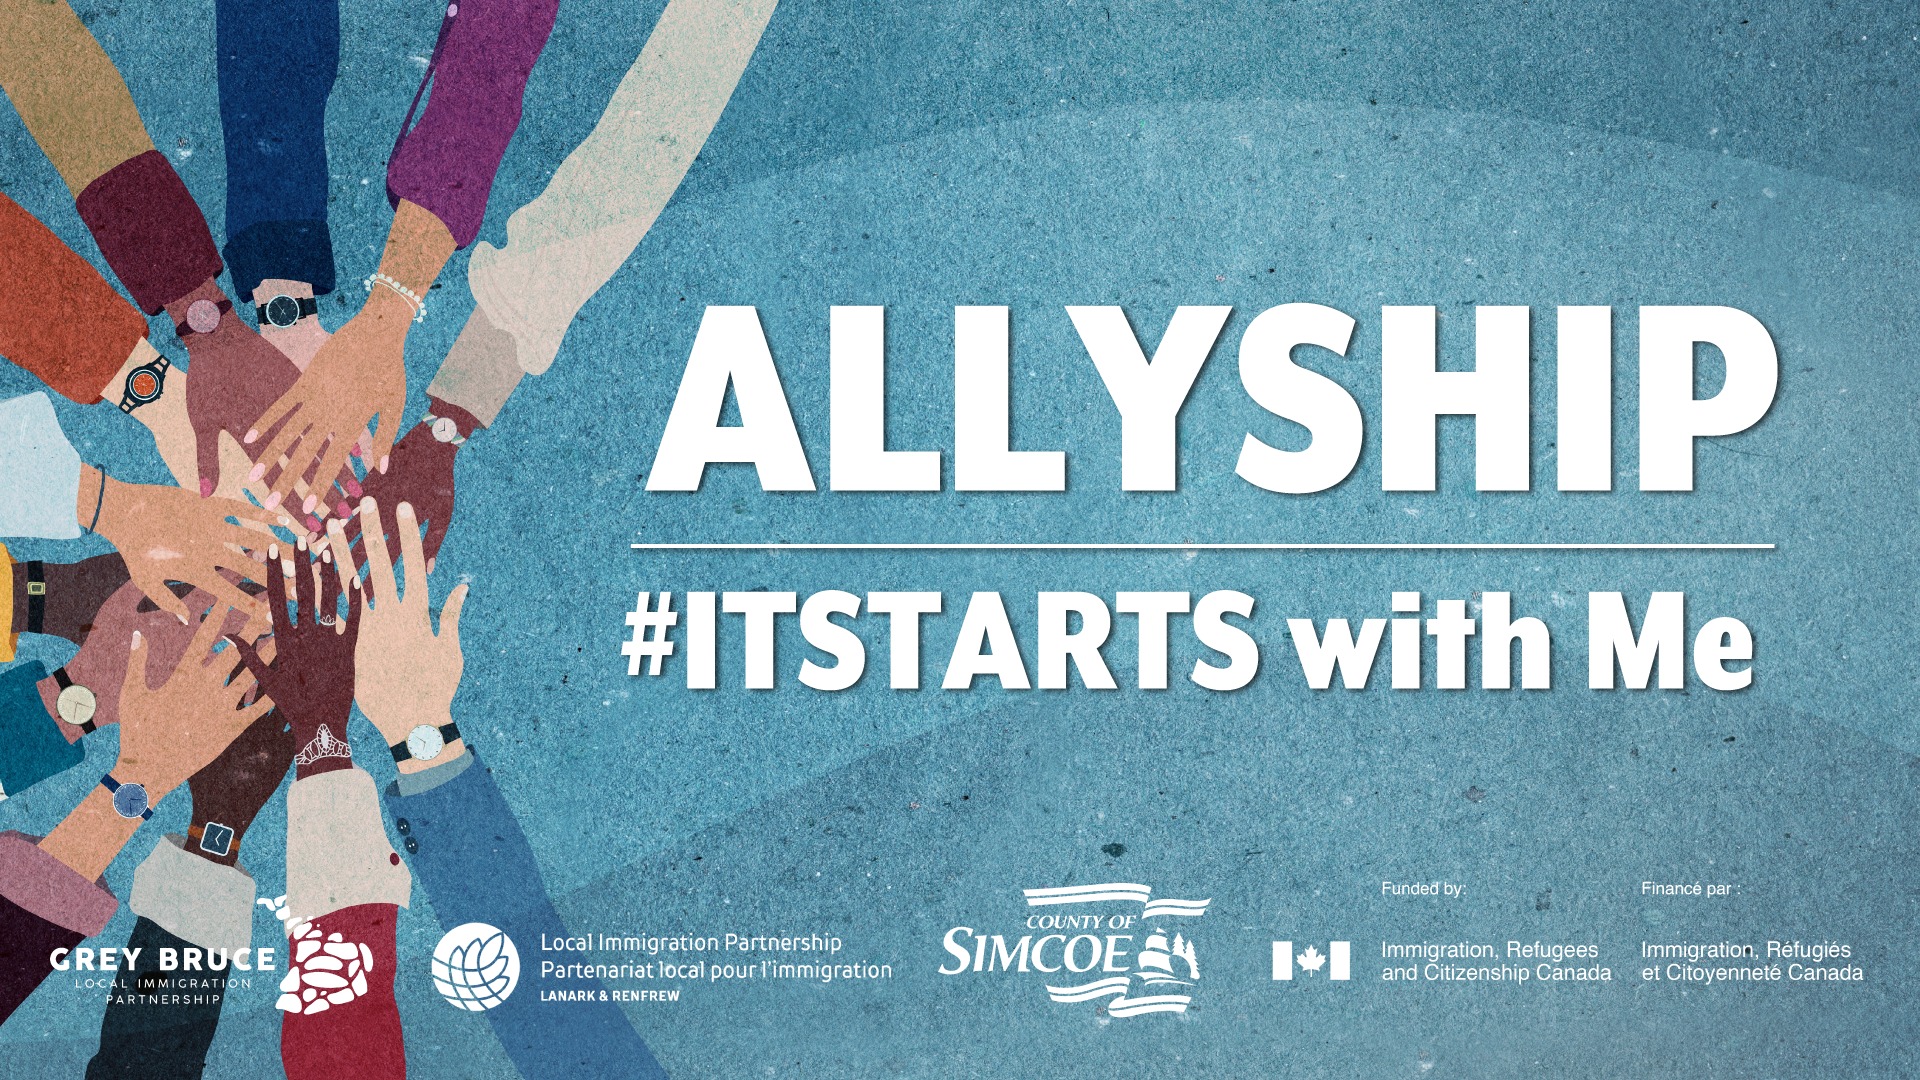 #ITSTARTS is a public awareness initiative developed by the Simcoe County Local Immigration Partnership to encourage positive communication among residents to reduce racism and discrimination.